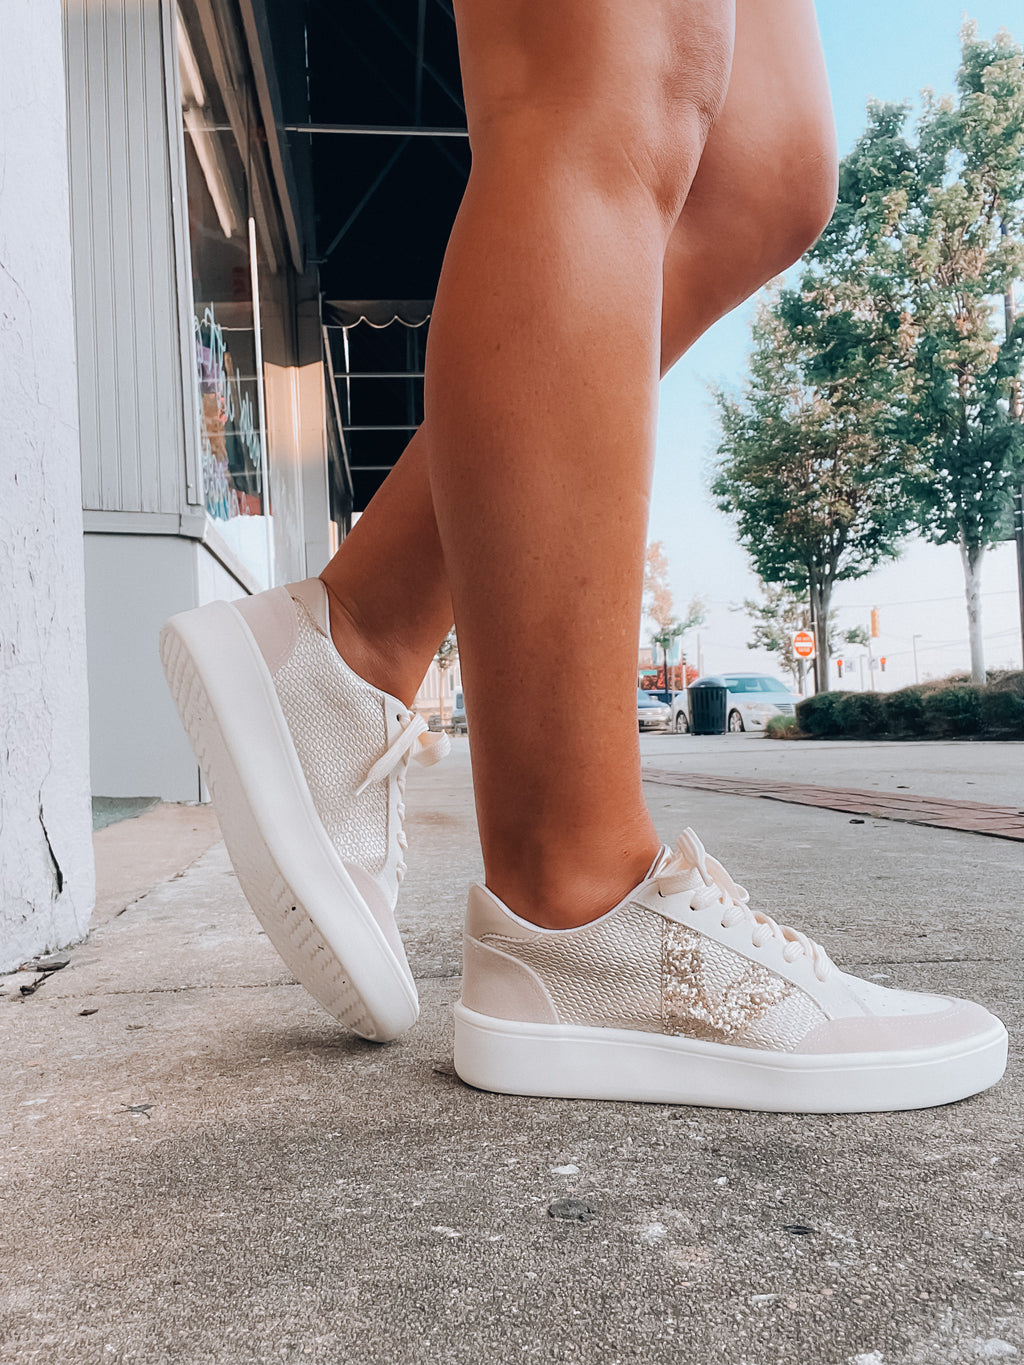 Elevate your style effortlessly with these Stride On Sneakers! They come with luxe gold sequin detailing, comfy memory foam, and traditional lace-up styling, so you can look great while feeling even better. Step out in style with these versatile sneakers!